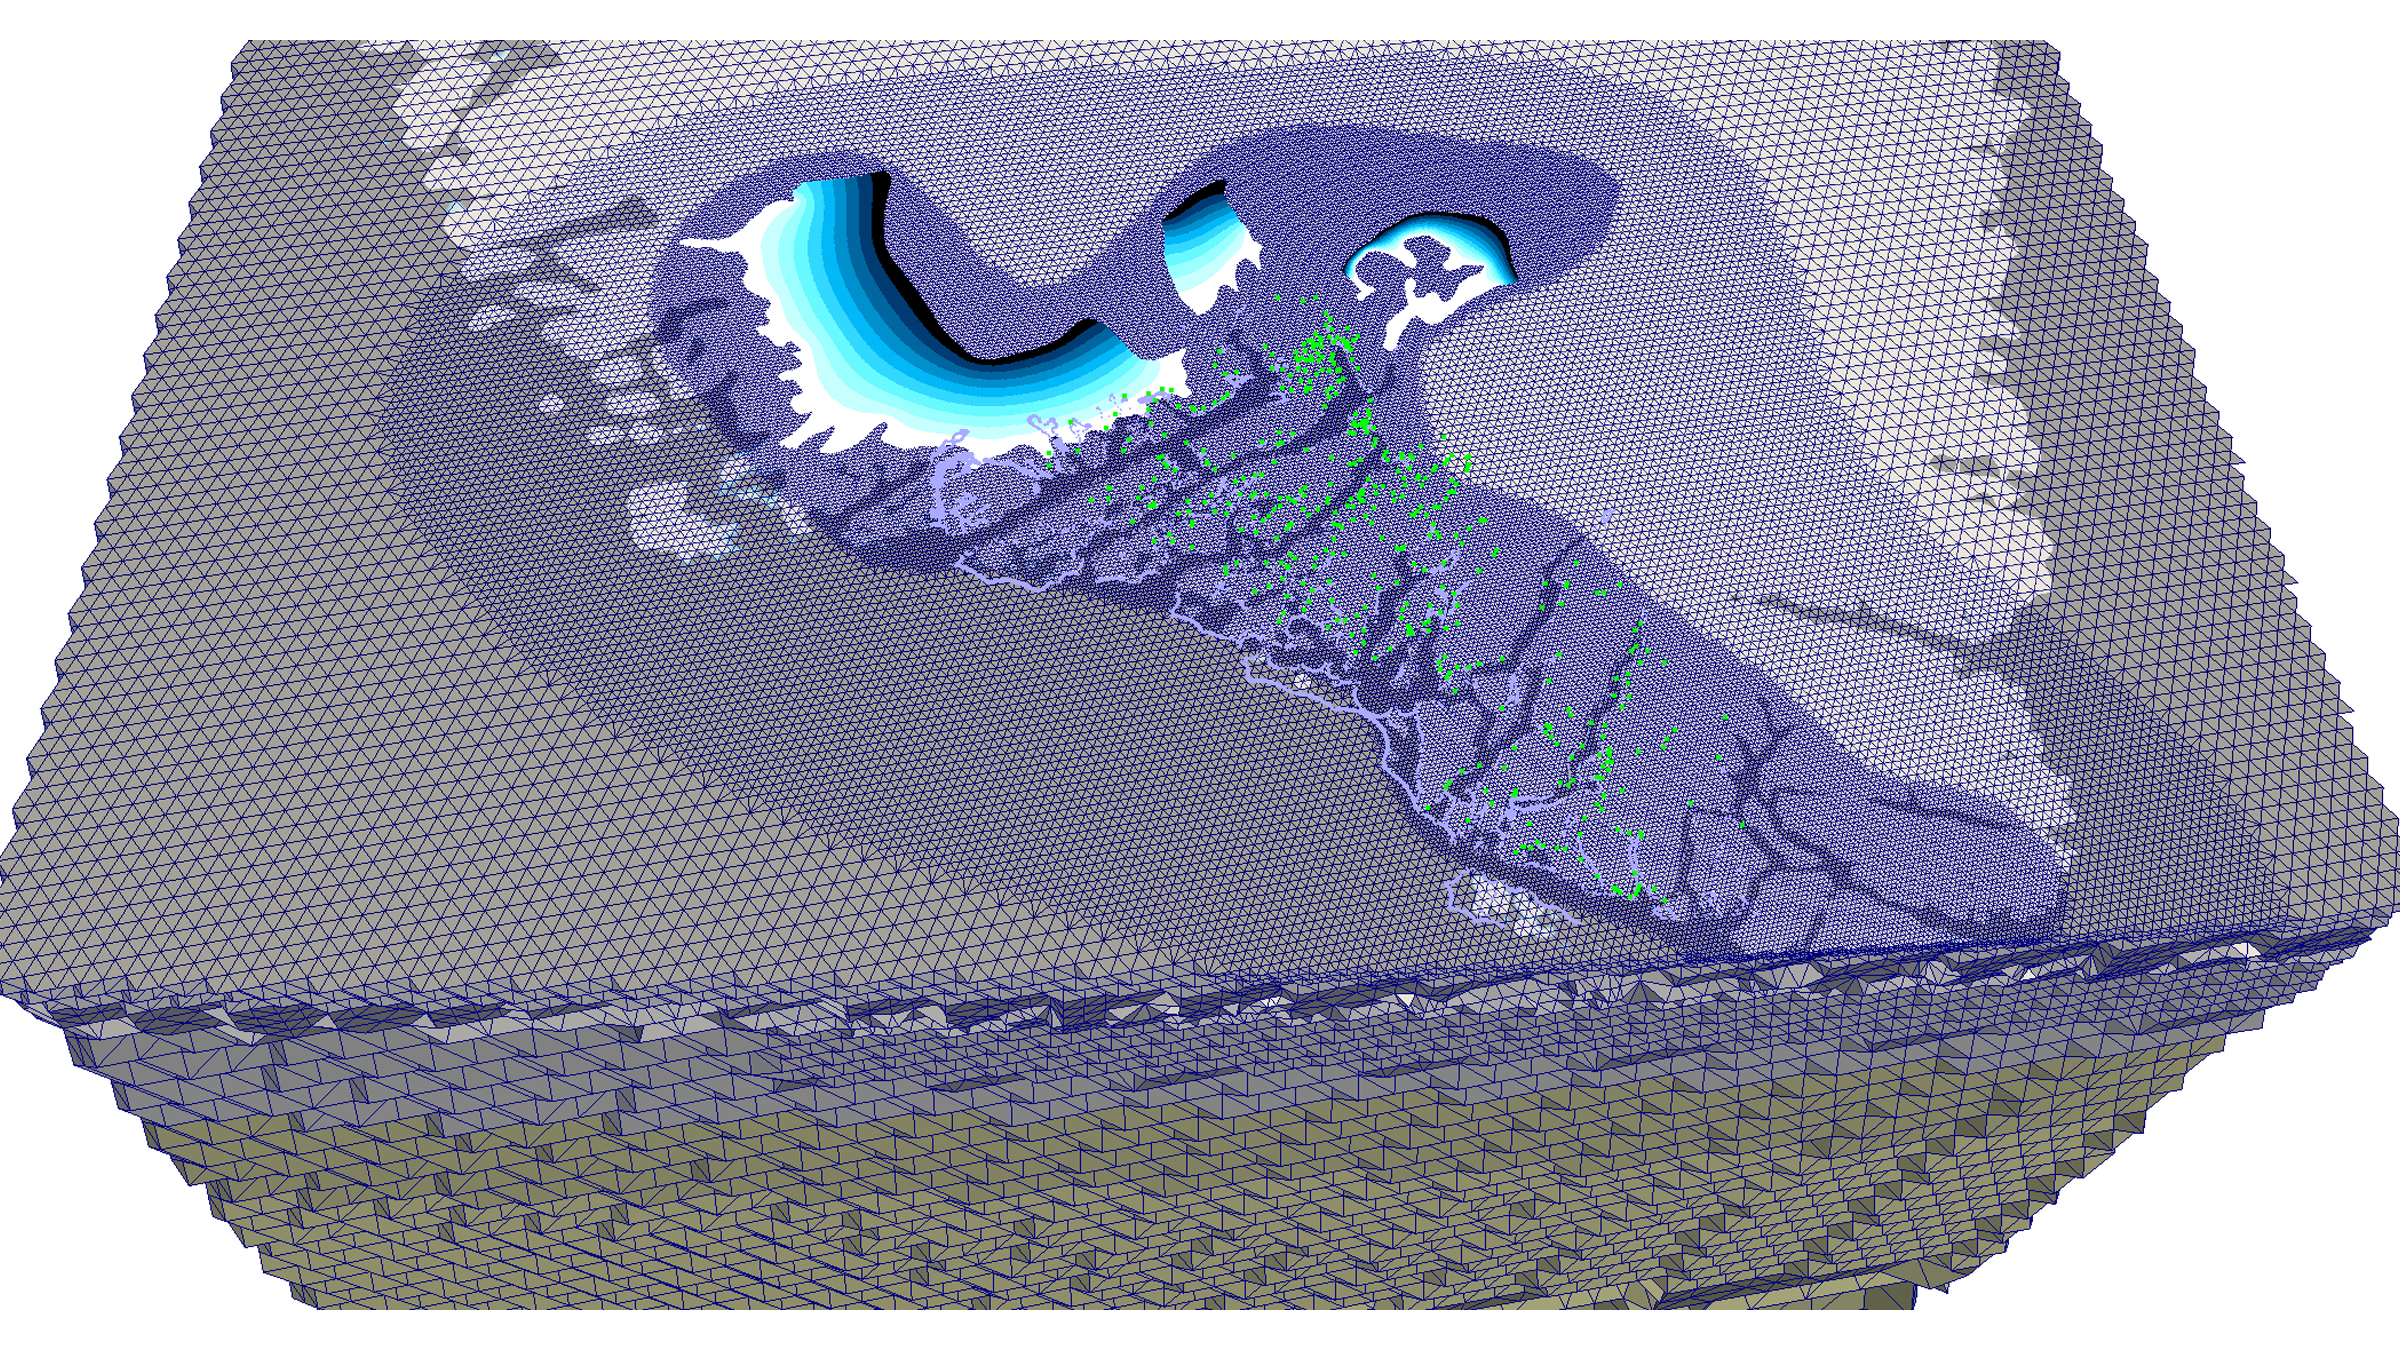 A rectangular digital 3D model showing the topography of part of greenland where it flooded at Viking sites.